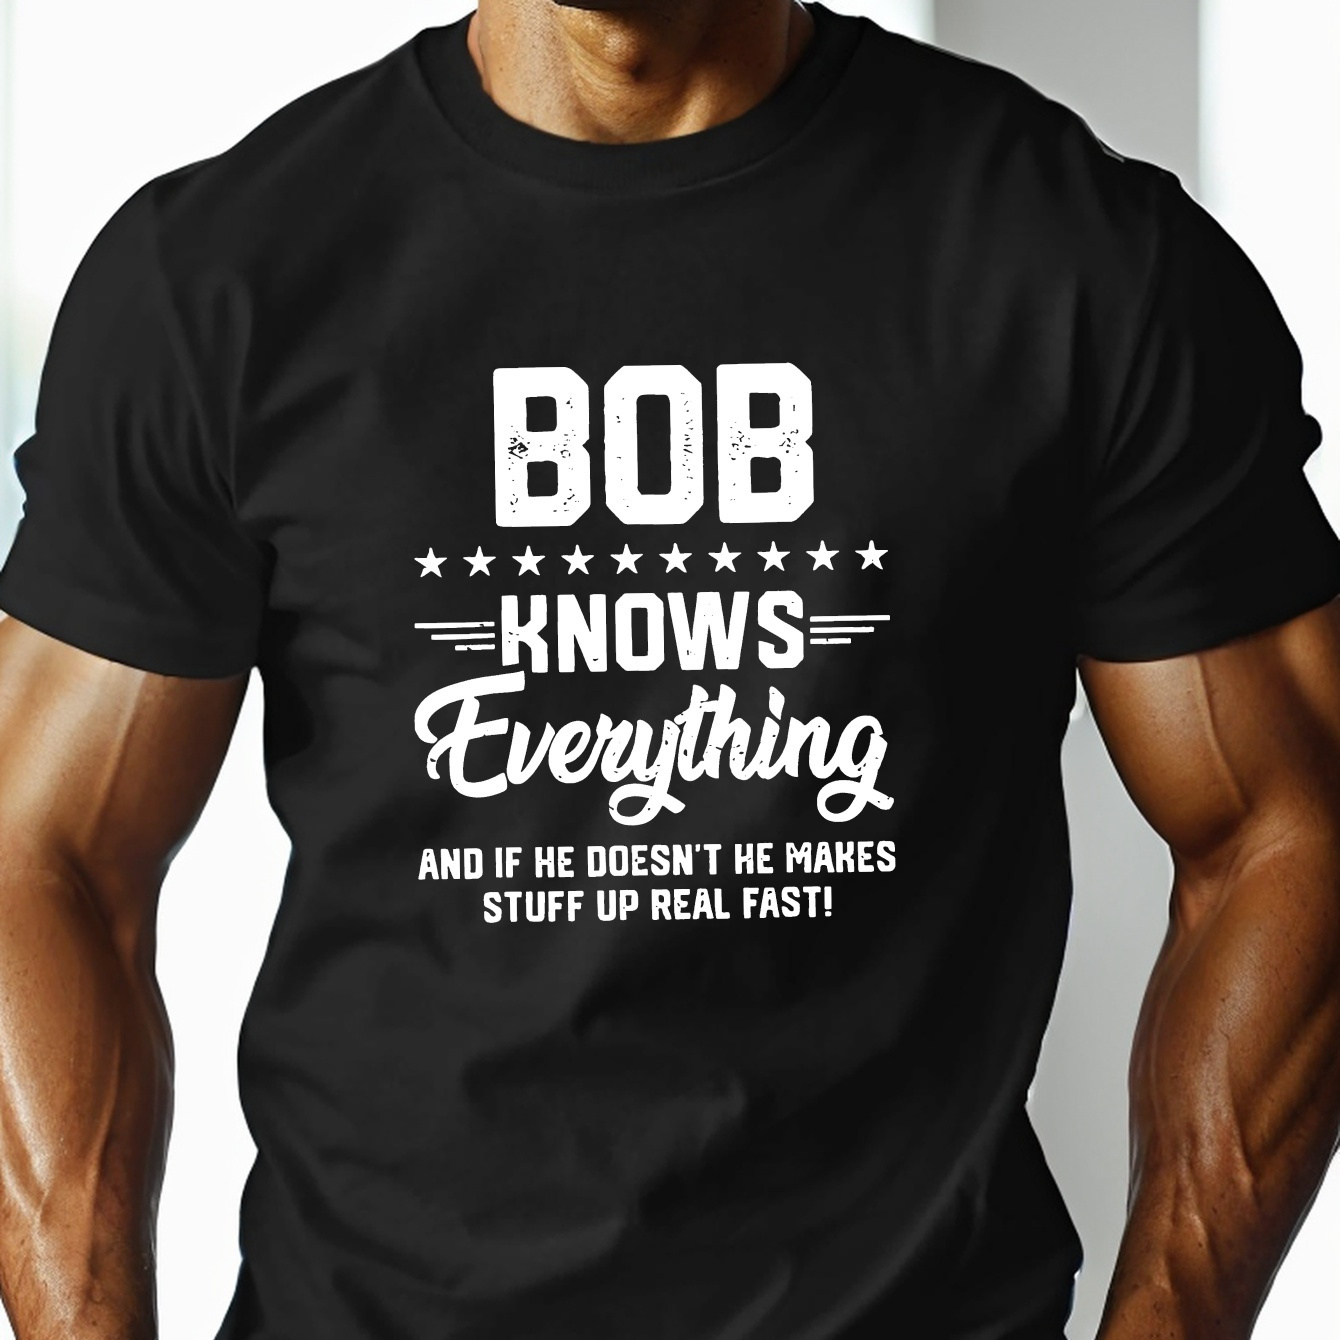 

Bob Knows Everything Print Pure Cotton Men's T-shirt, Comfort Fit, Casual Style, Crew Neck, Mid-weight Fabric For Daily Wear, 1 Pc, 100% Cotton T-shirt